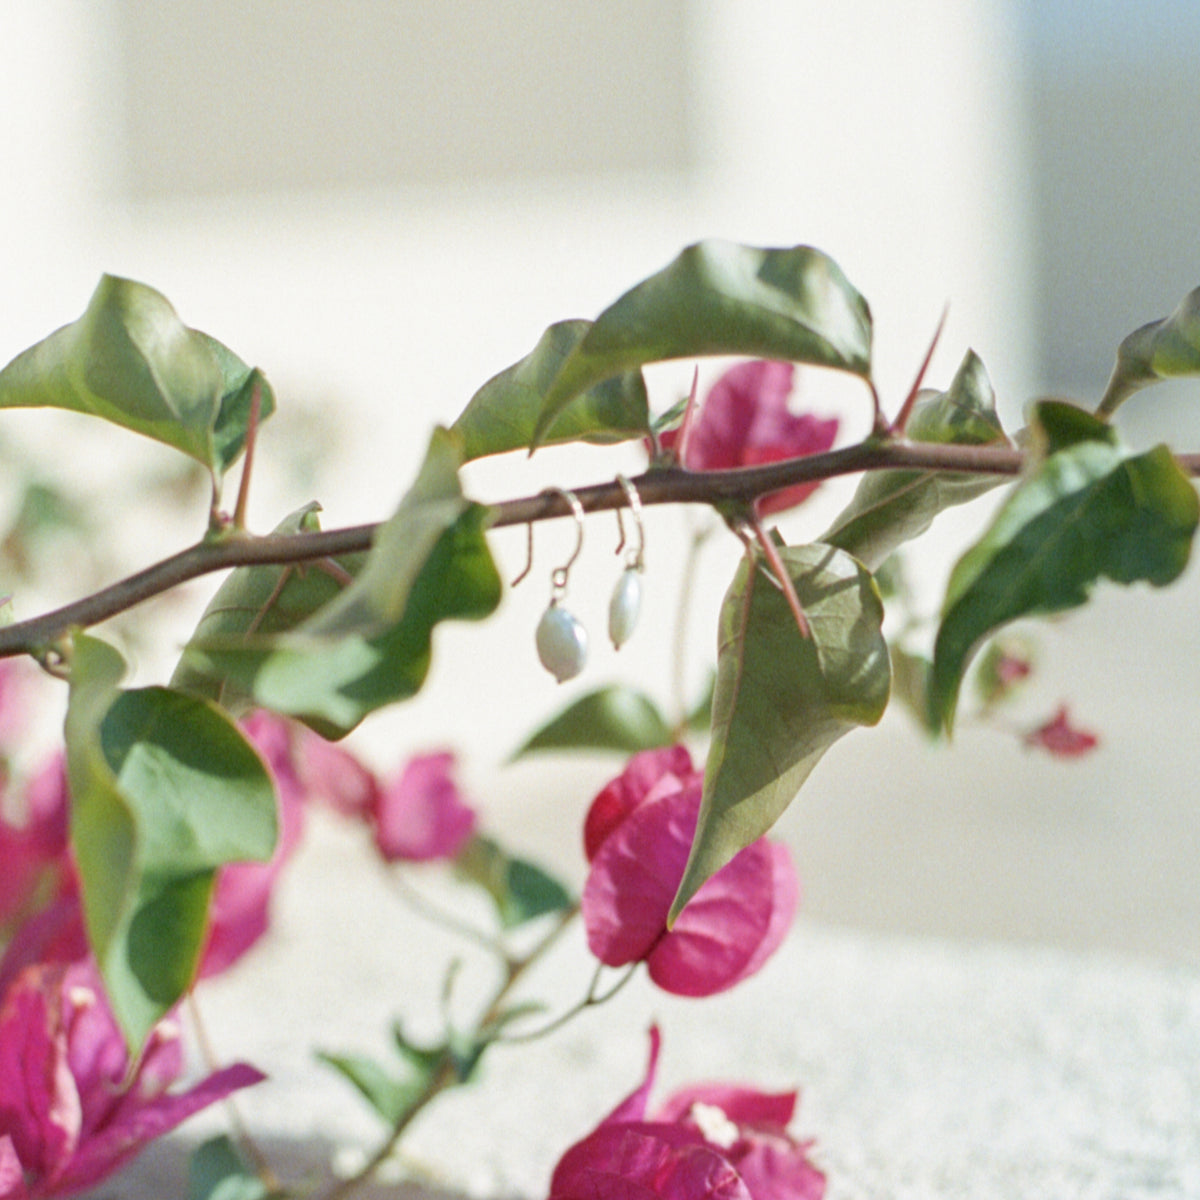 Two pearl earrings hanging from a pink bougainvillea plant.